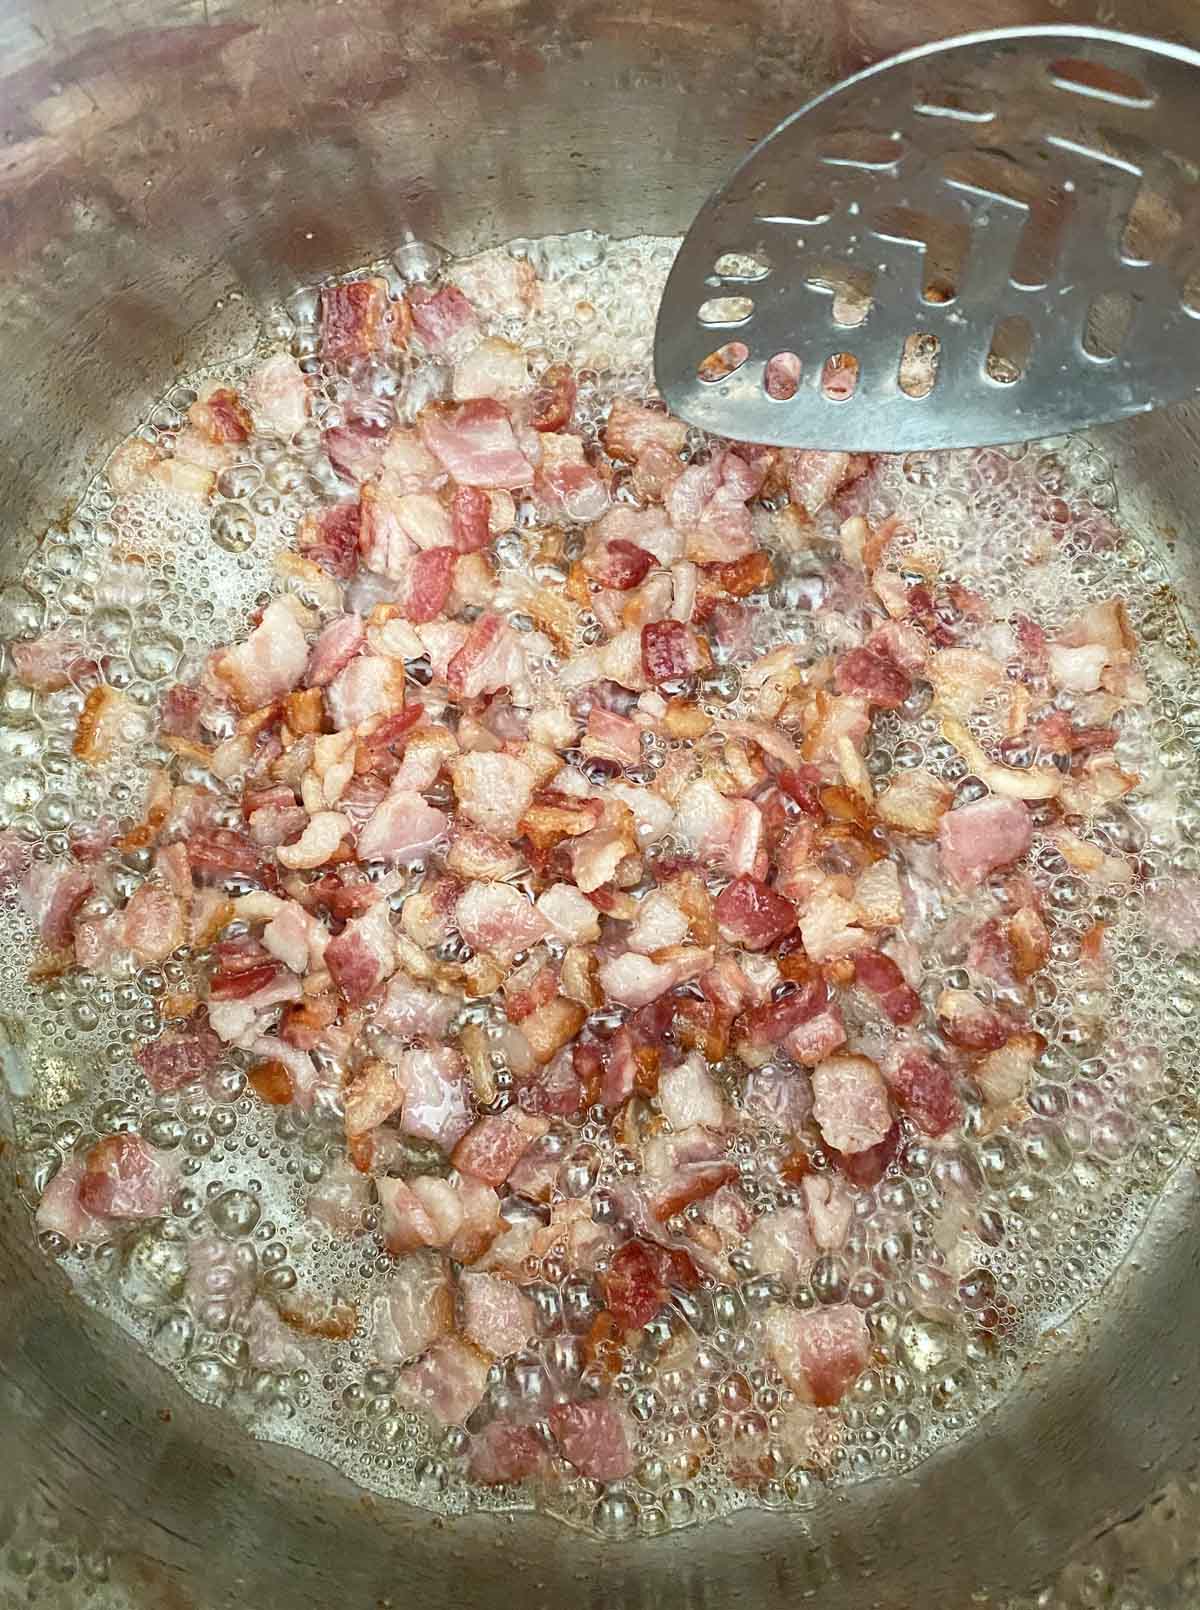 Chopped bacon cooking in a pot with a silver slotted spoon stirring.